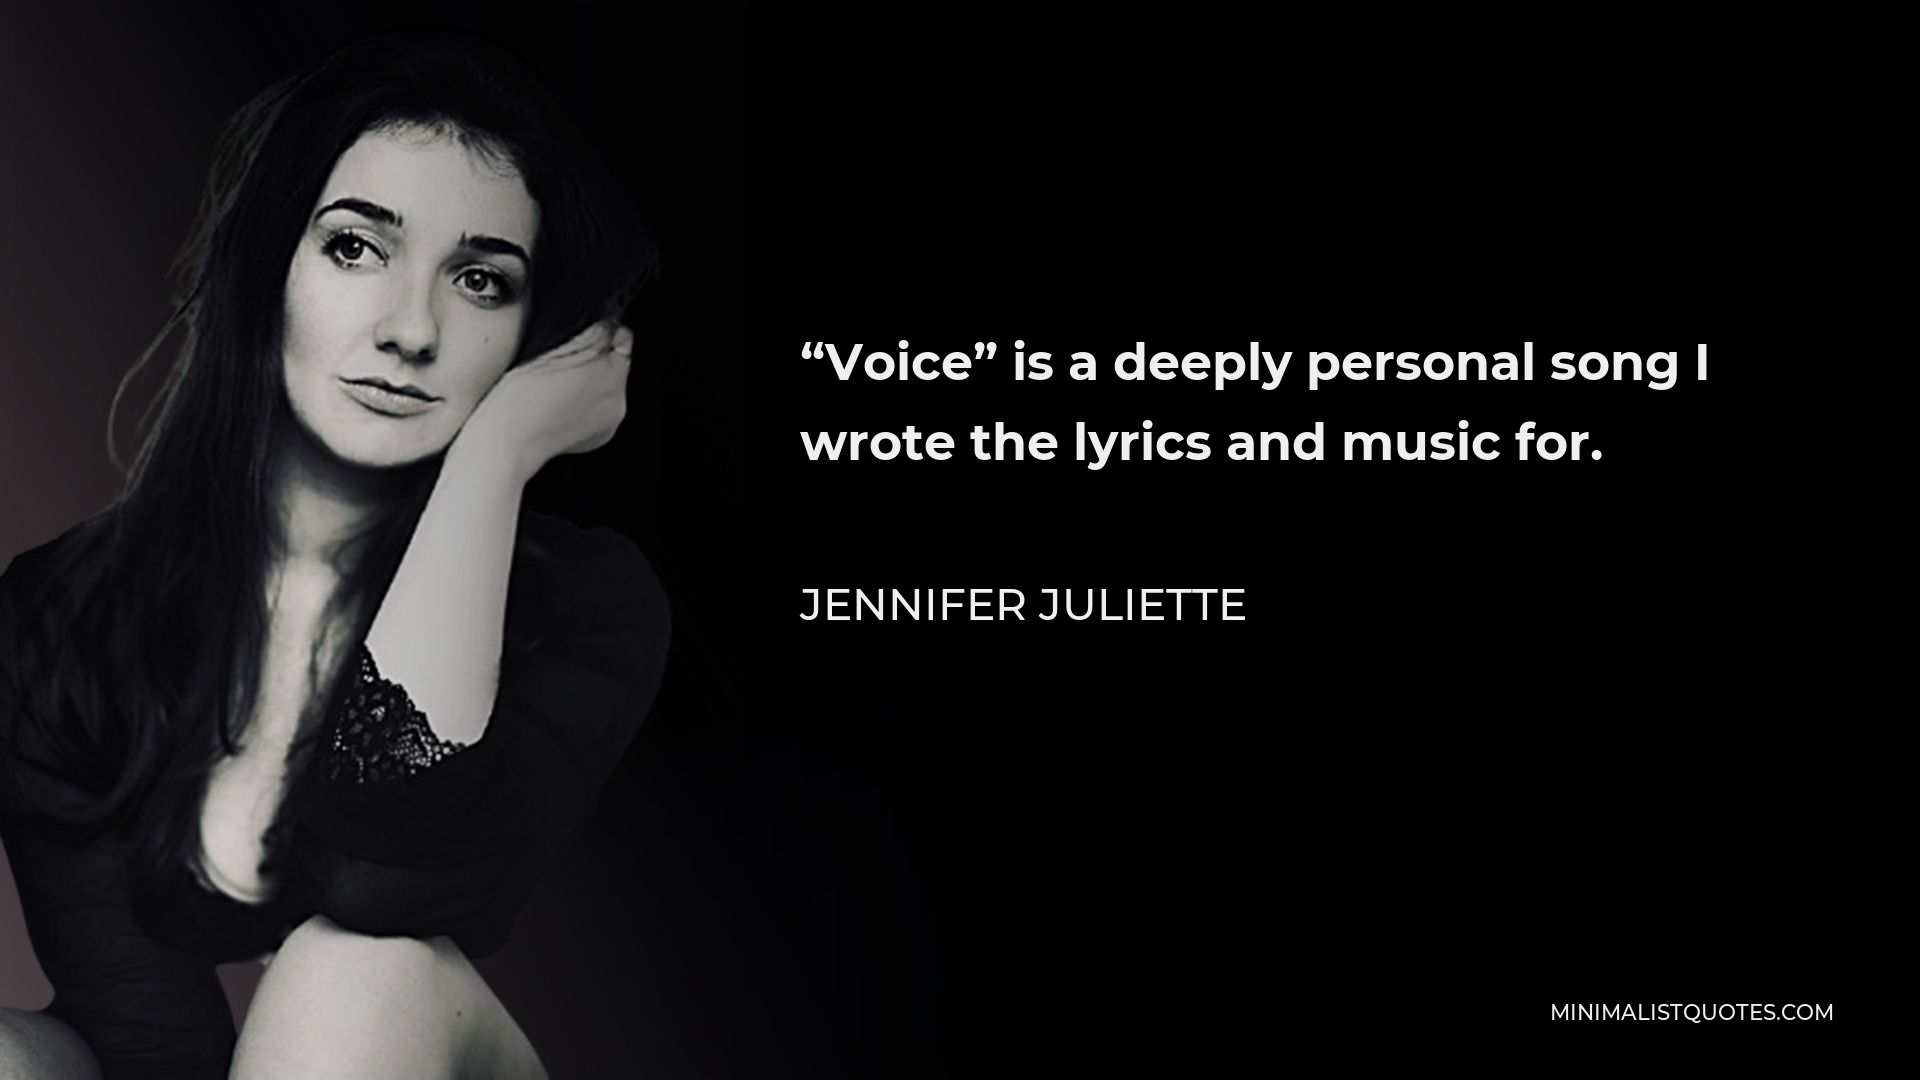 Jennifer Juliette Quote - “Voice” is a deeply personal song I wrote the lyrics and music for.